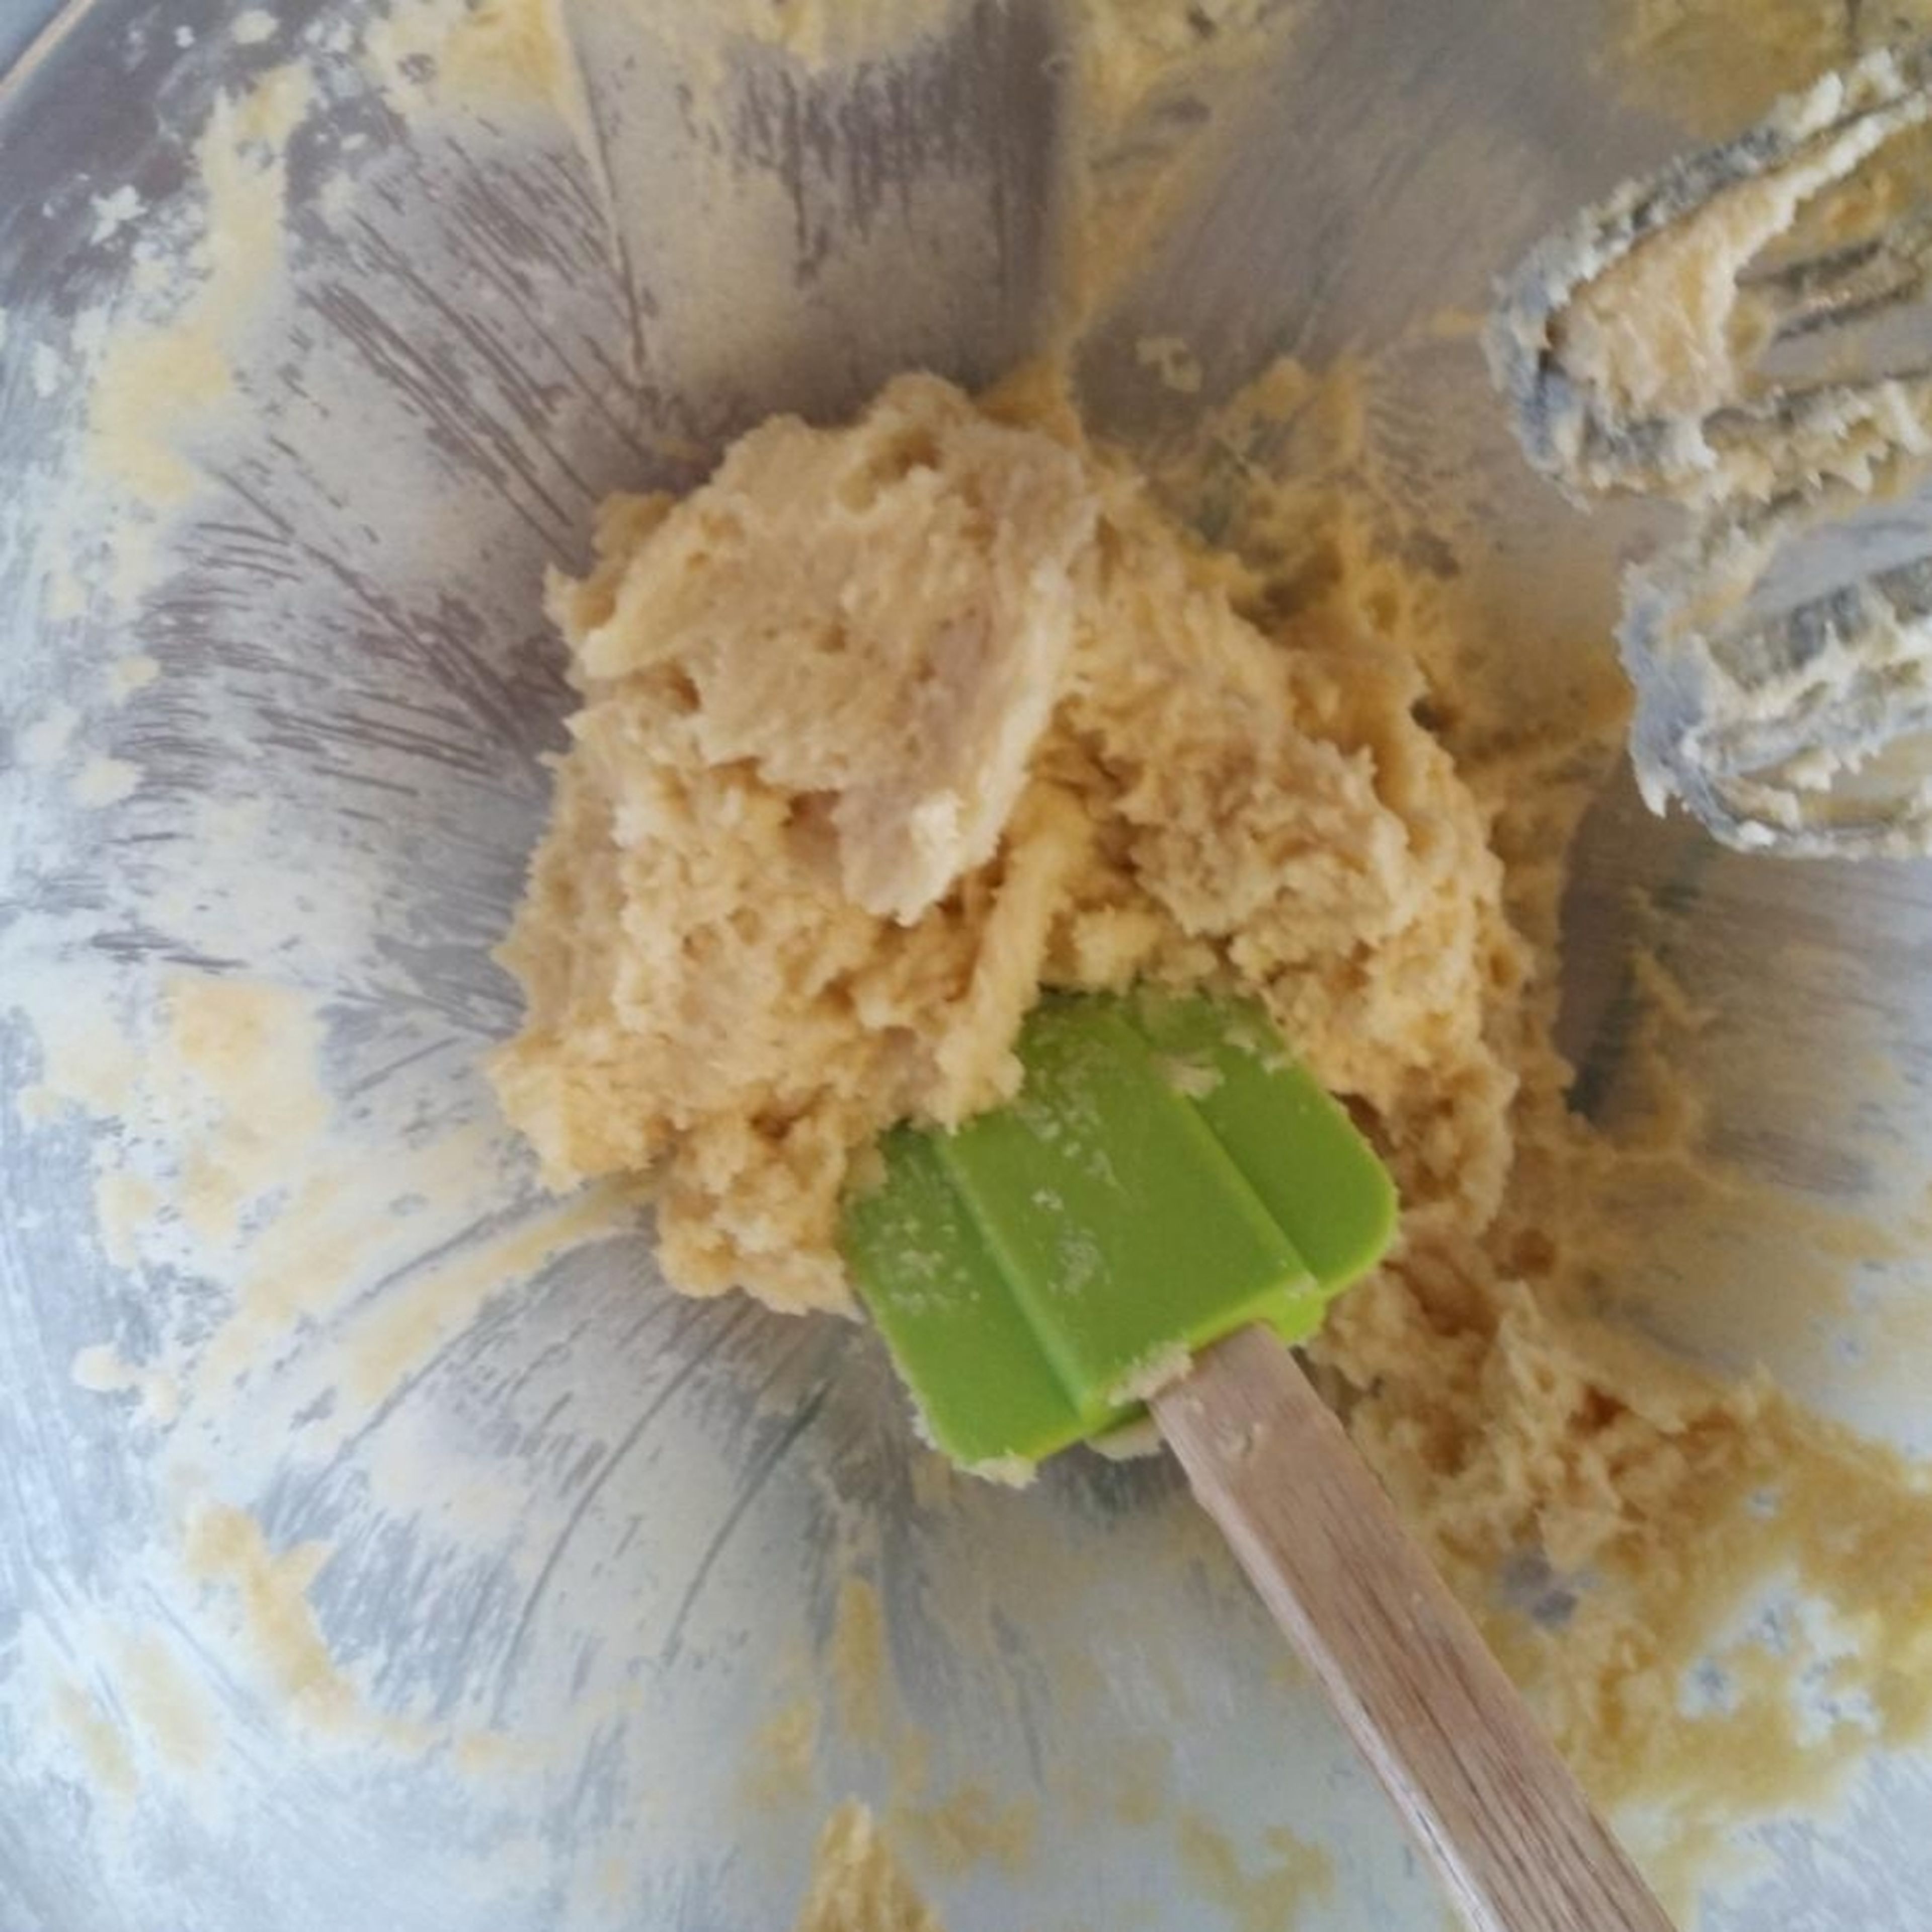 Preheat the oven to gas mark 2/150°C/130°C fan. Cream together the butter and sugar until smooth, creamy and light - about 10 minutes (electric mixer). Make sure to scrape down the sides of the bowl every now and then.